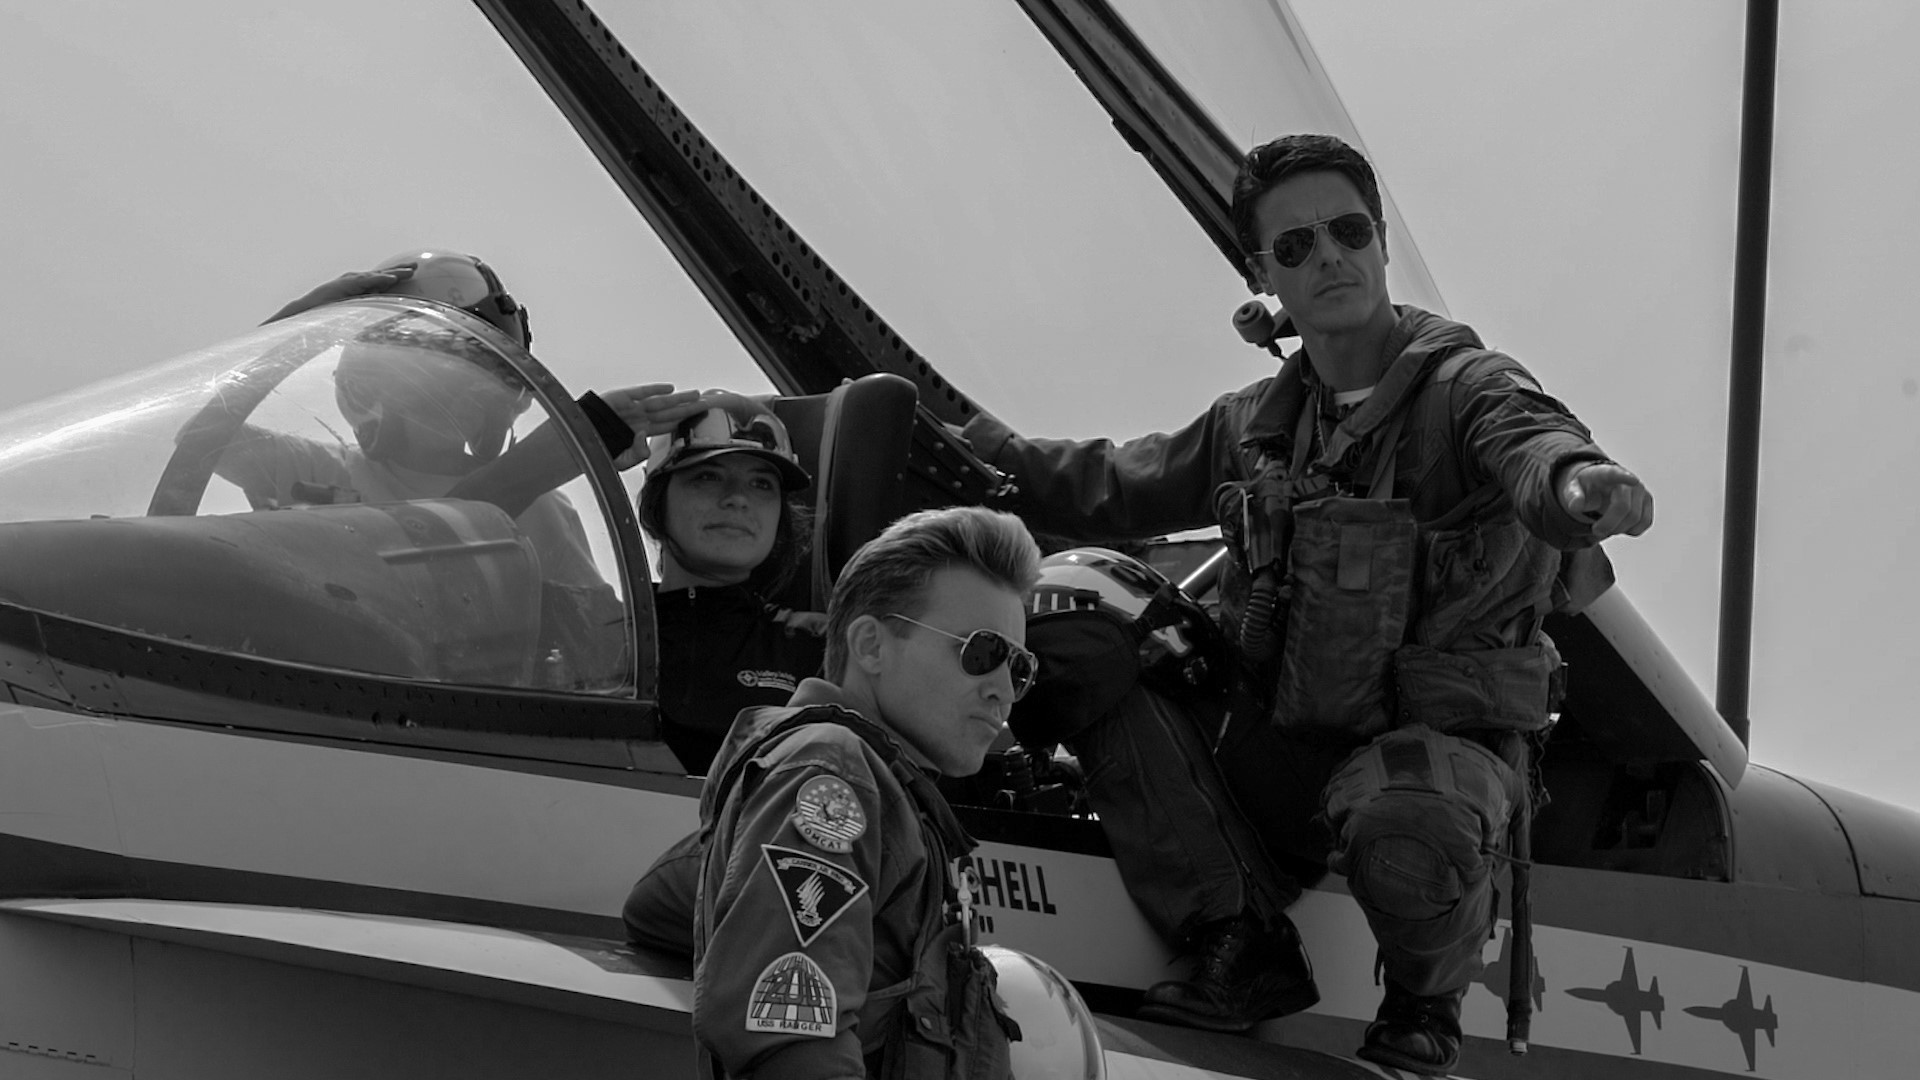 Two Top Gun impersonators cross the nation to bring back that lovin' feeling